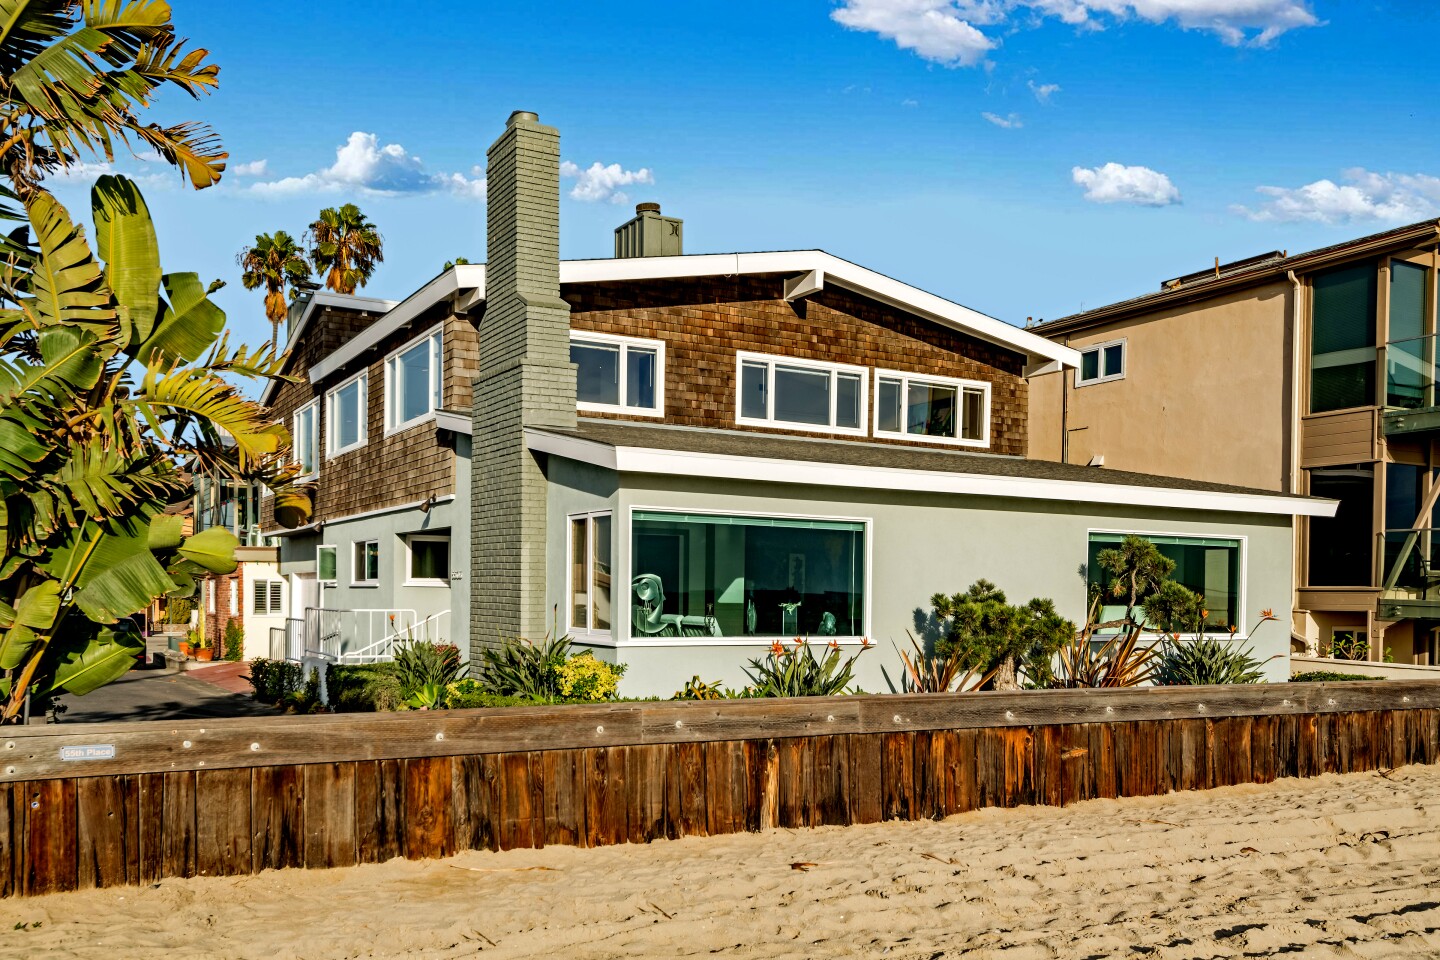 Beach house Clad in wood shingles, this charming beach house boasts expansive living spaces and an unbeatable location. It’s listed by Chase and Blake Nicolai of Nicolai Real Estate. Address: 5501 E. Seaside Walk, Long Beach, CA 90803 Price: $2.995 million